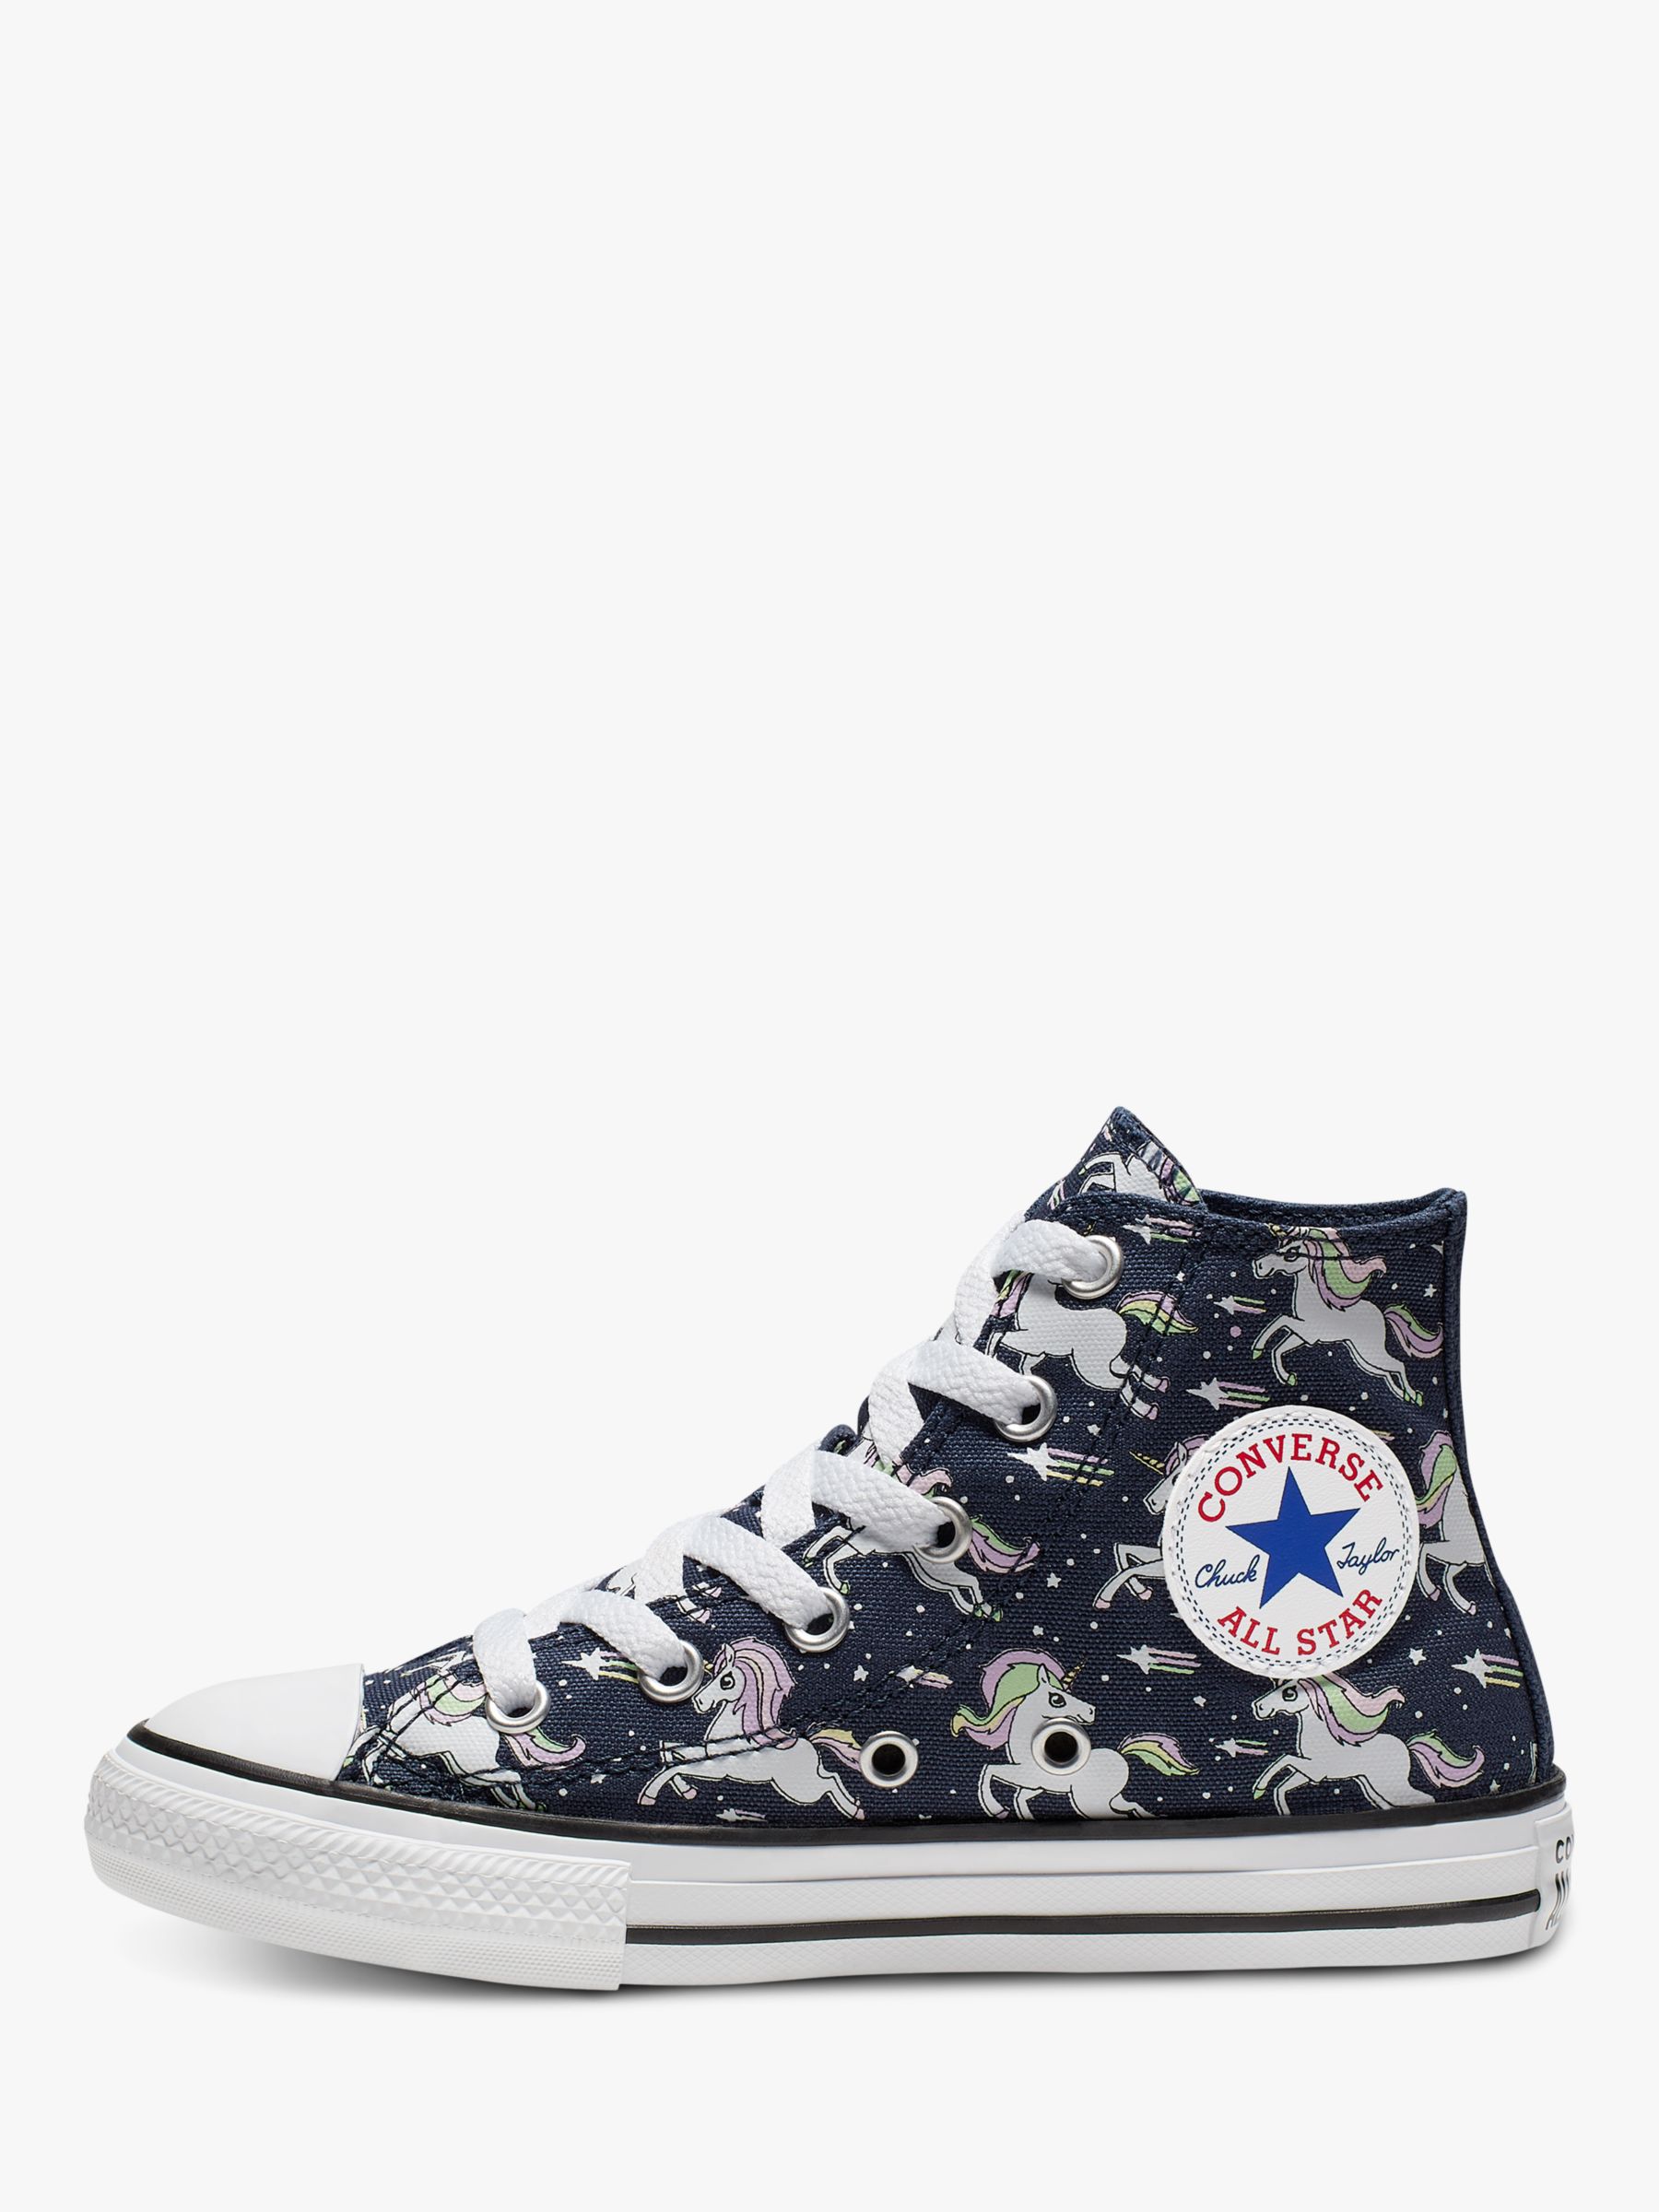 Converse Children's Chuck Taylor All Star High Top Unicorn Trainers, Navy